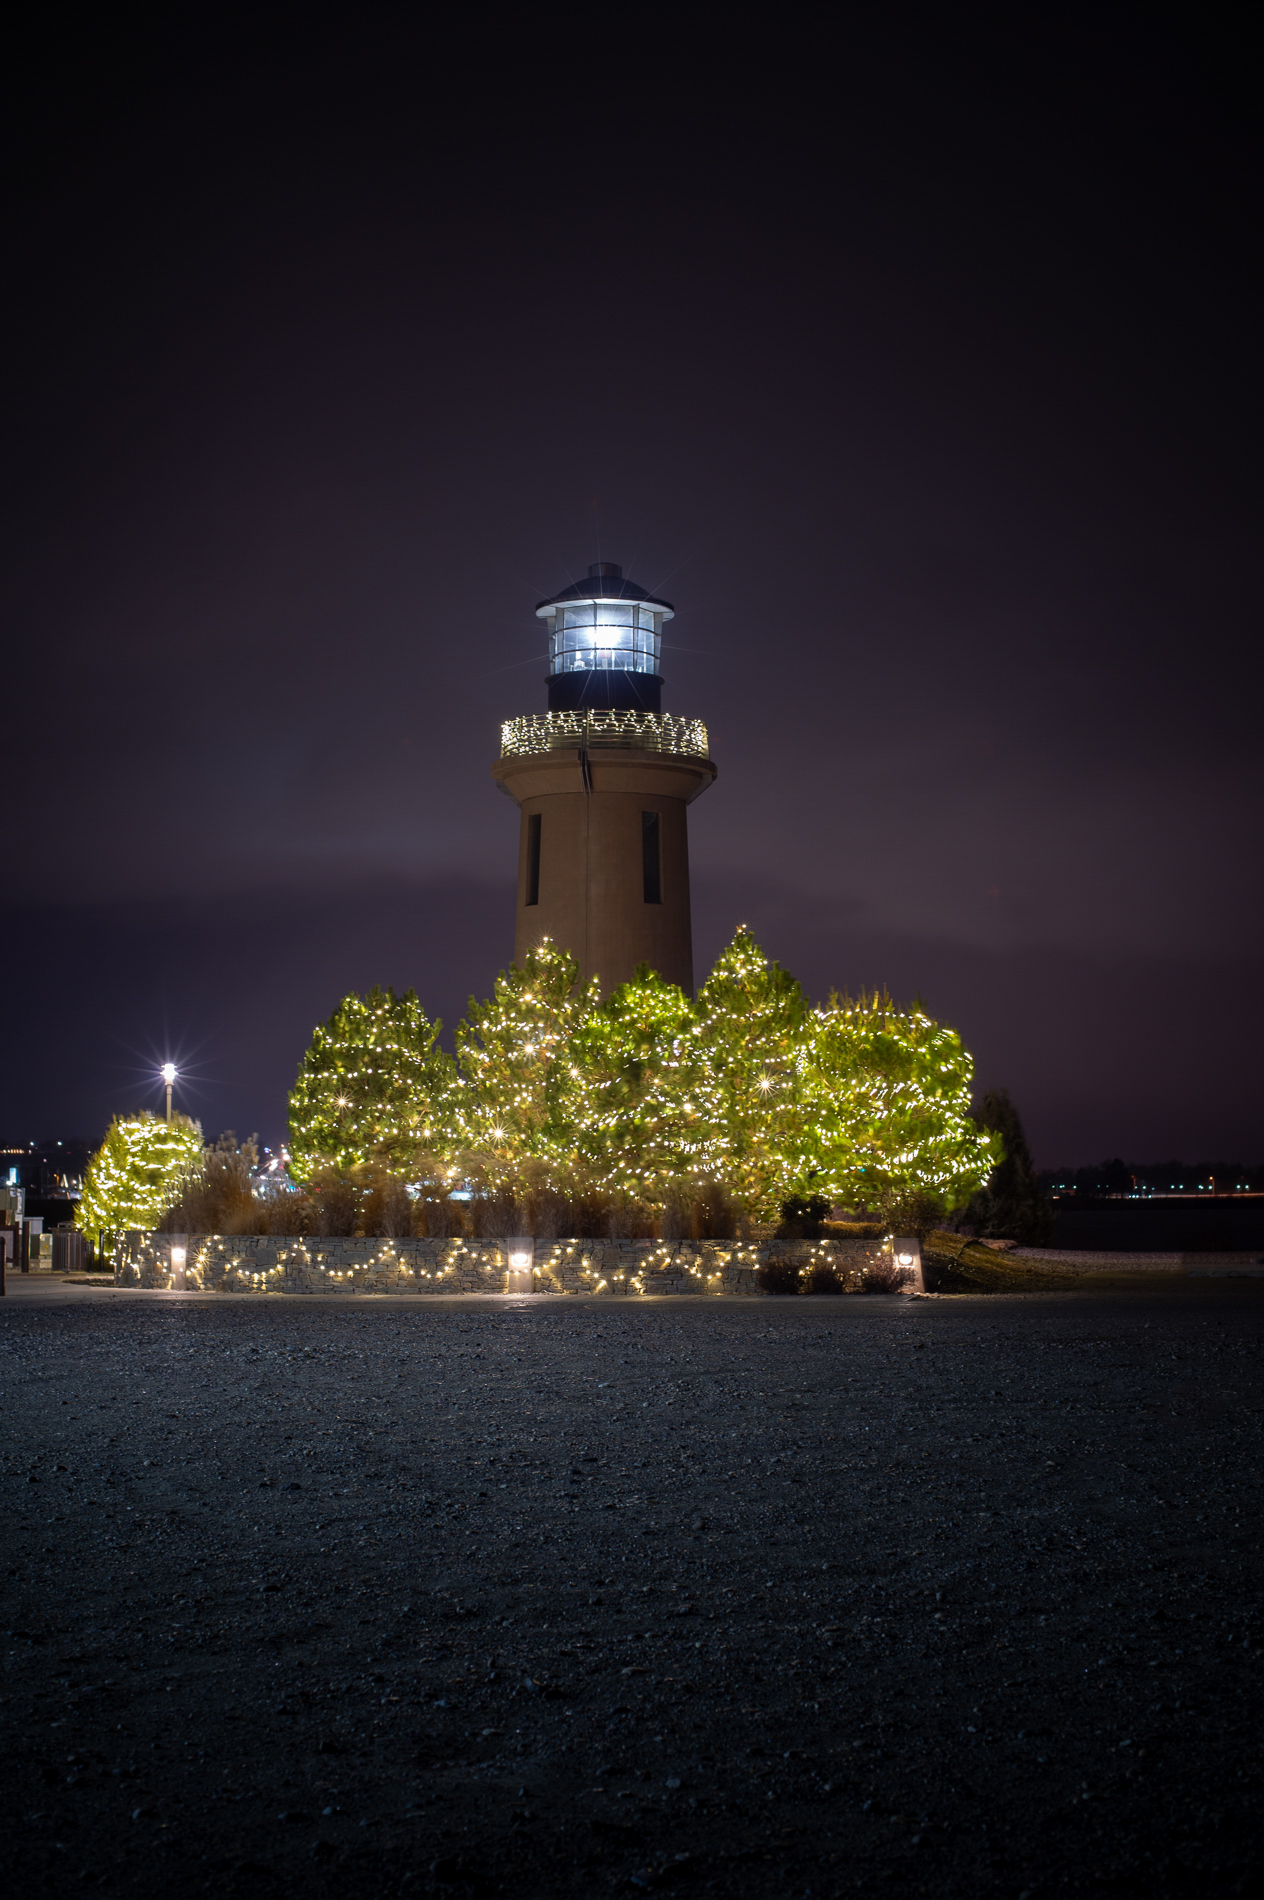 The Lighthouse at Christmas